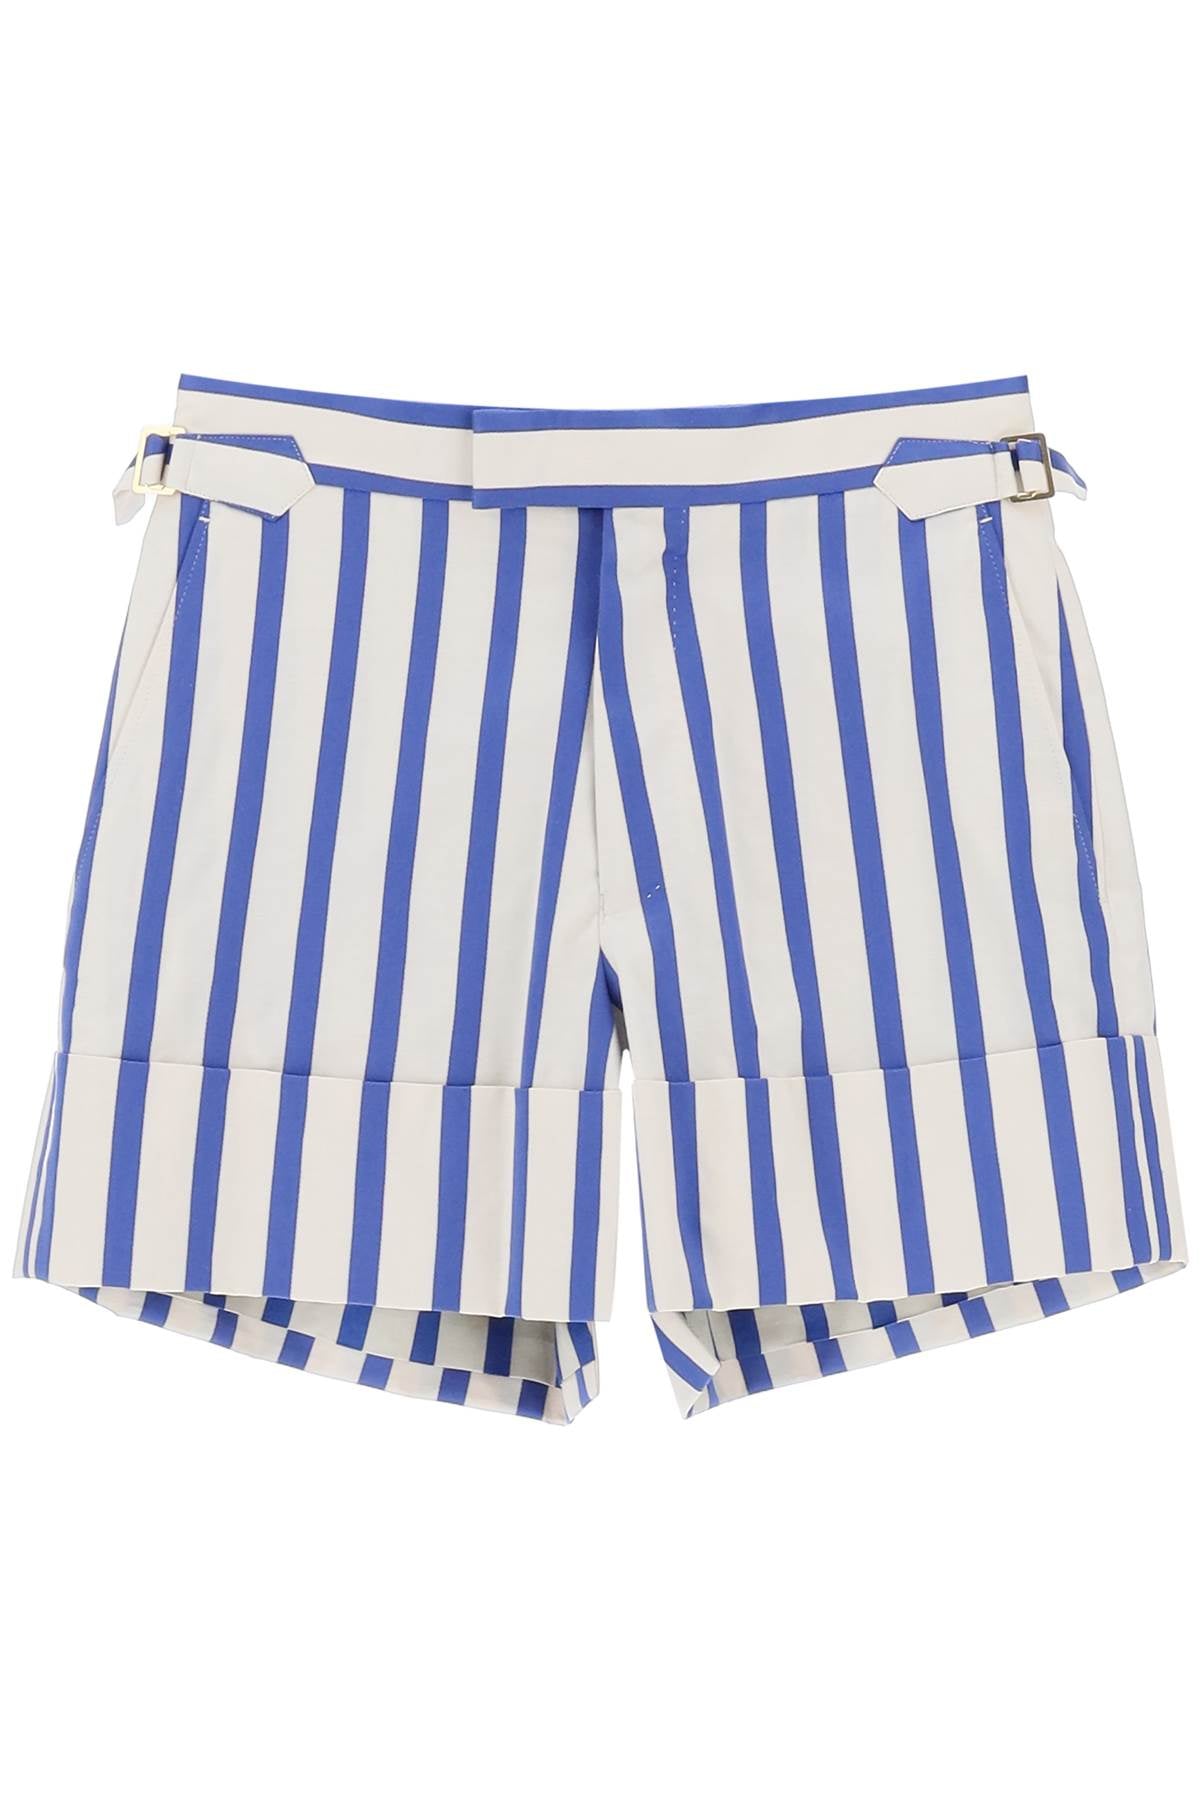 VIVIENNE WESTWOOD Striped High-Rise Fashion Shorts for Women in Mixed Colors